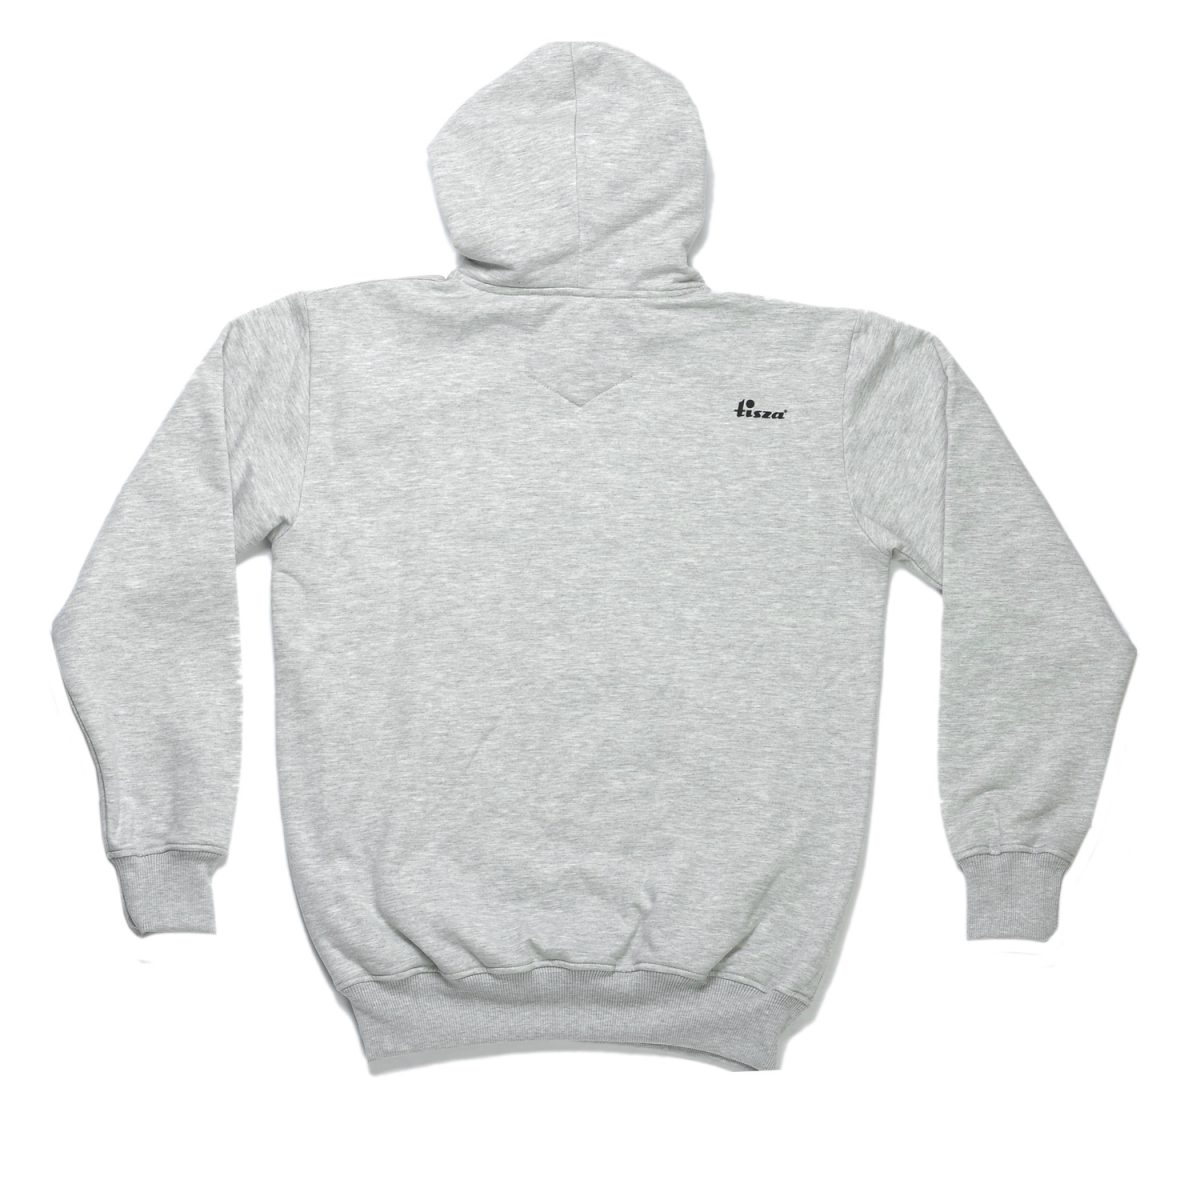 Tisza shoes - Pullover - Gray hoodie